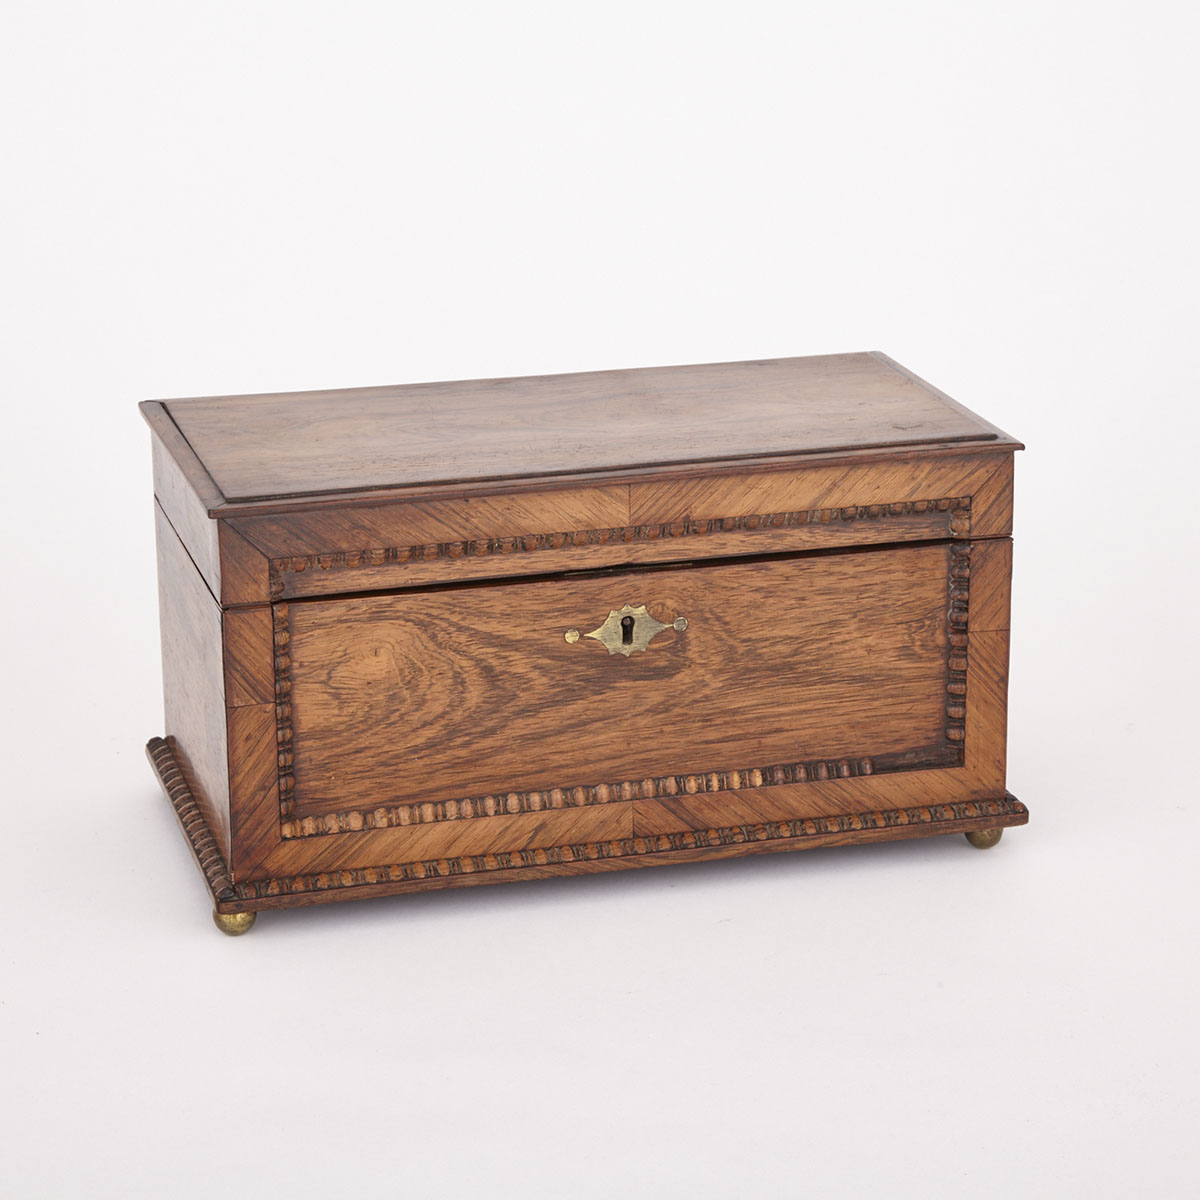 Early Victorian Rosewood Tea Caddy, c.1840